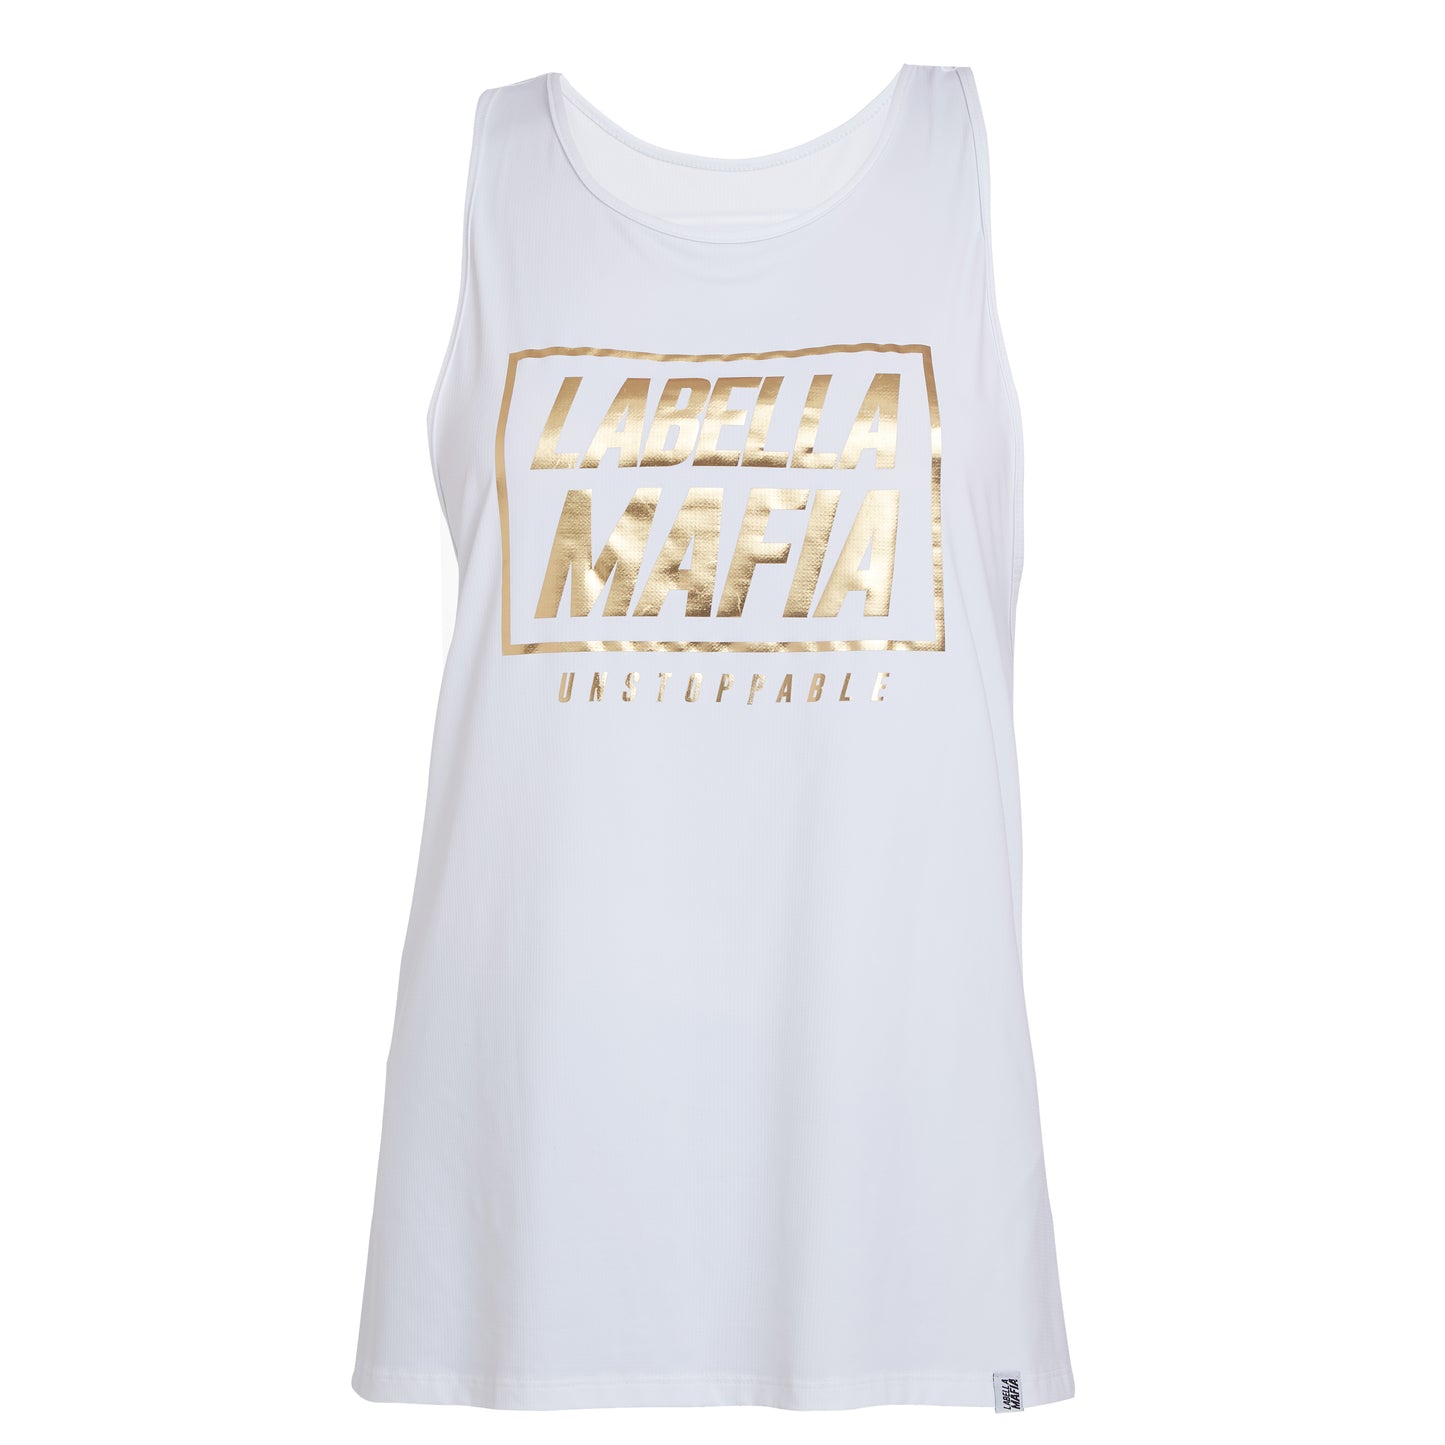 GREY AND GOLD TANK 20750